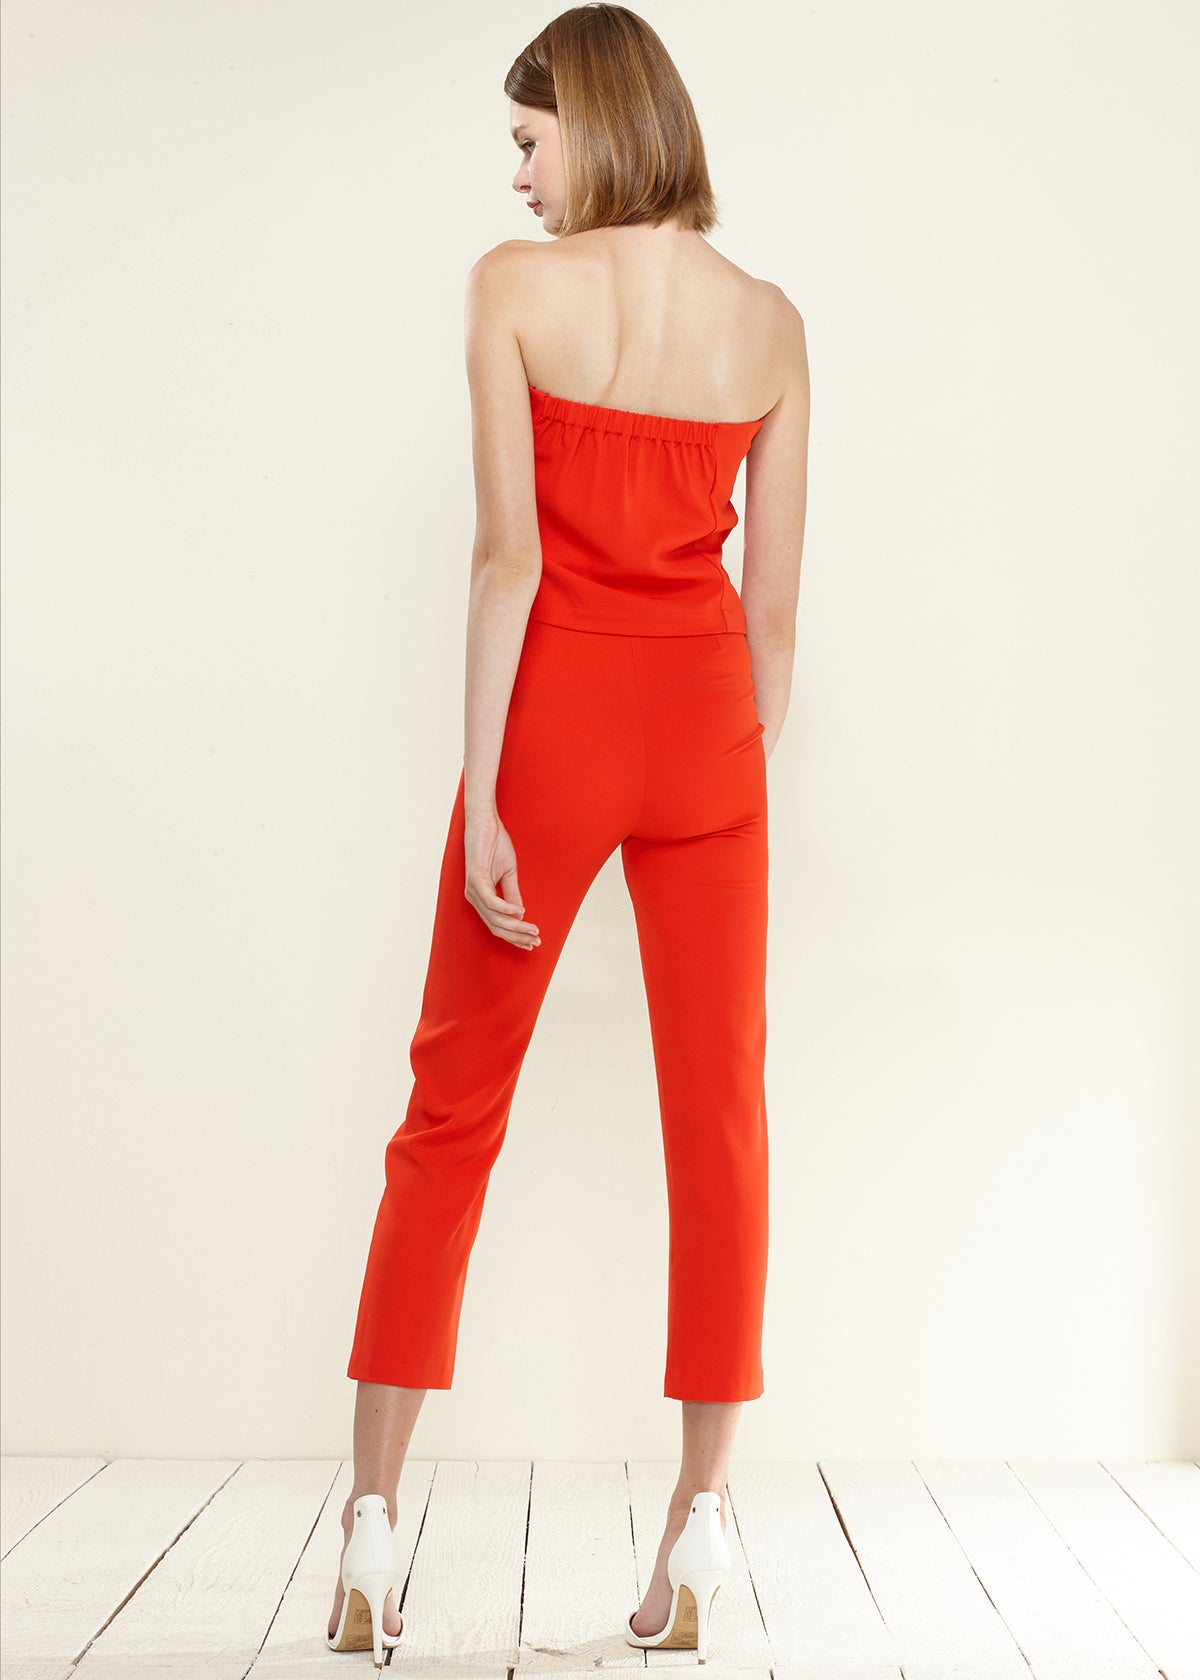 High-Waisted Cropped Pants by Shop at Konus